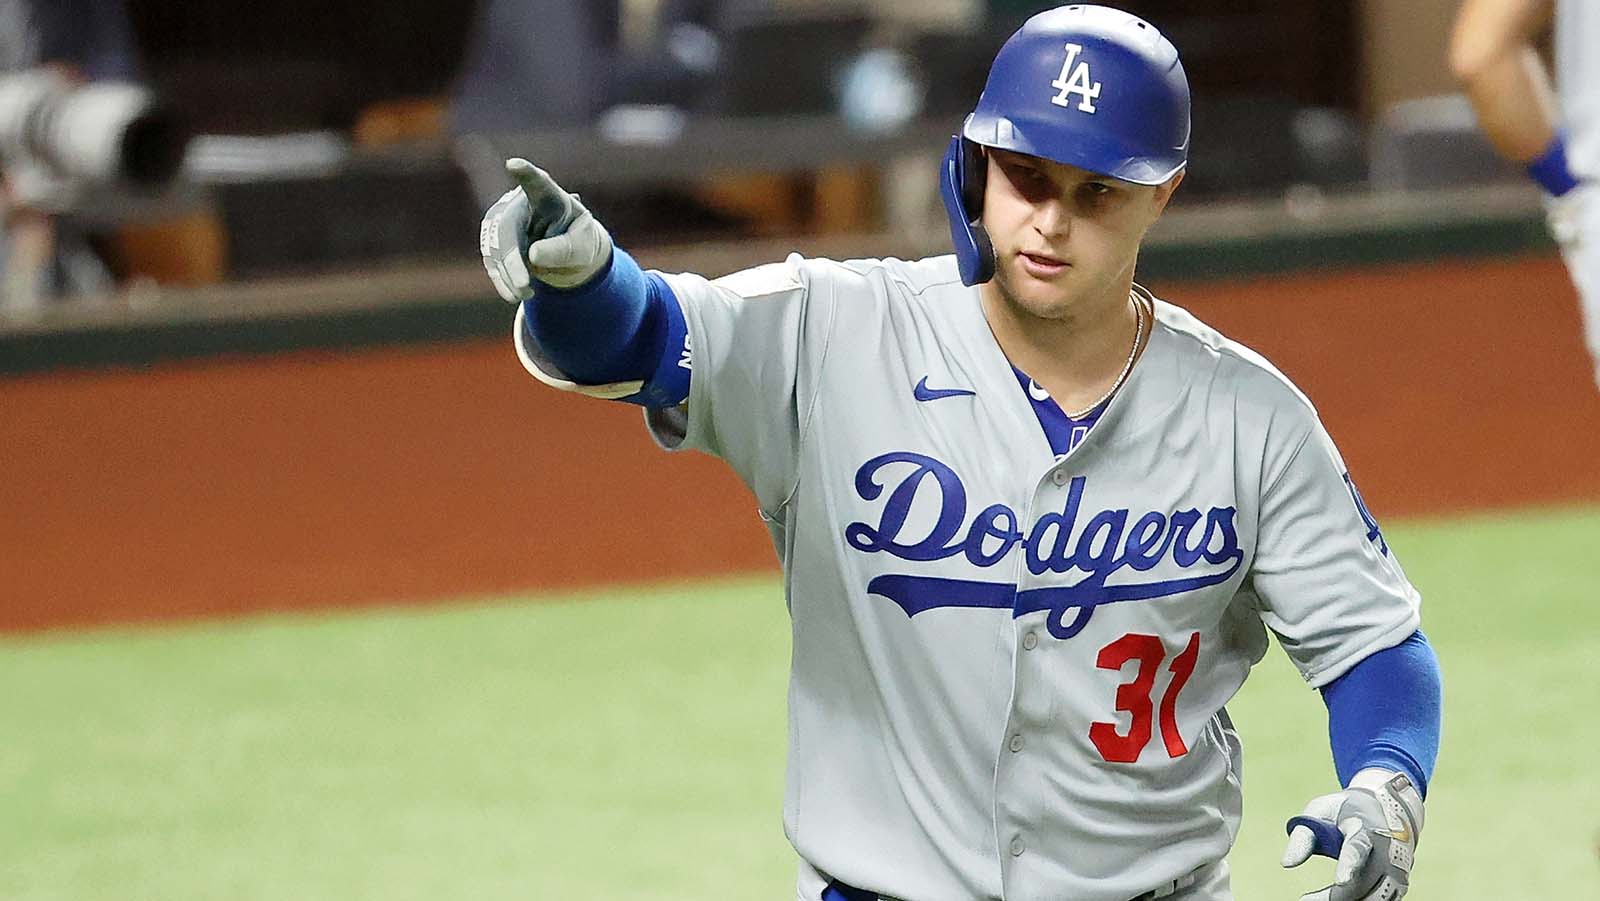 Giants sign Joc Pederson to one-year, $6 million deal, per report